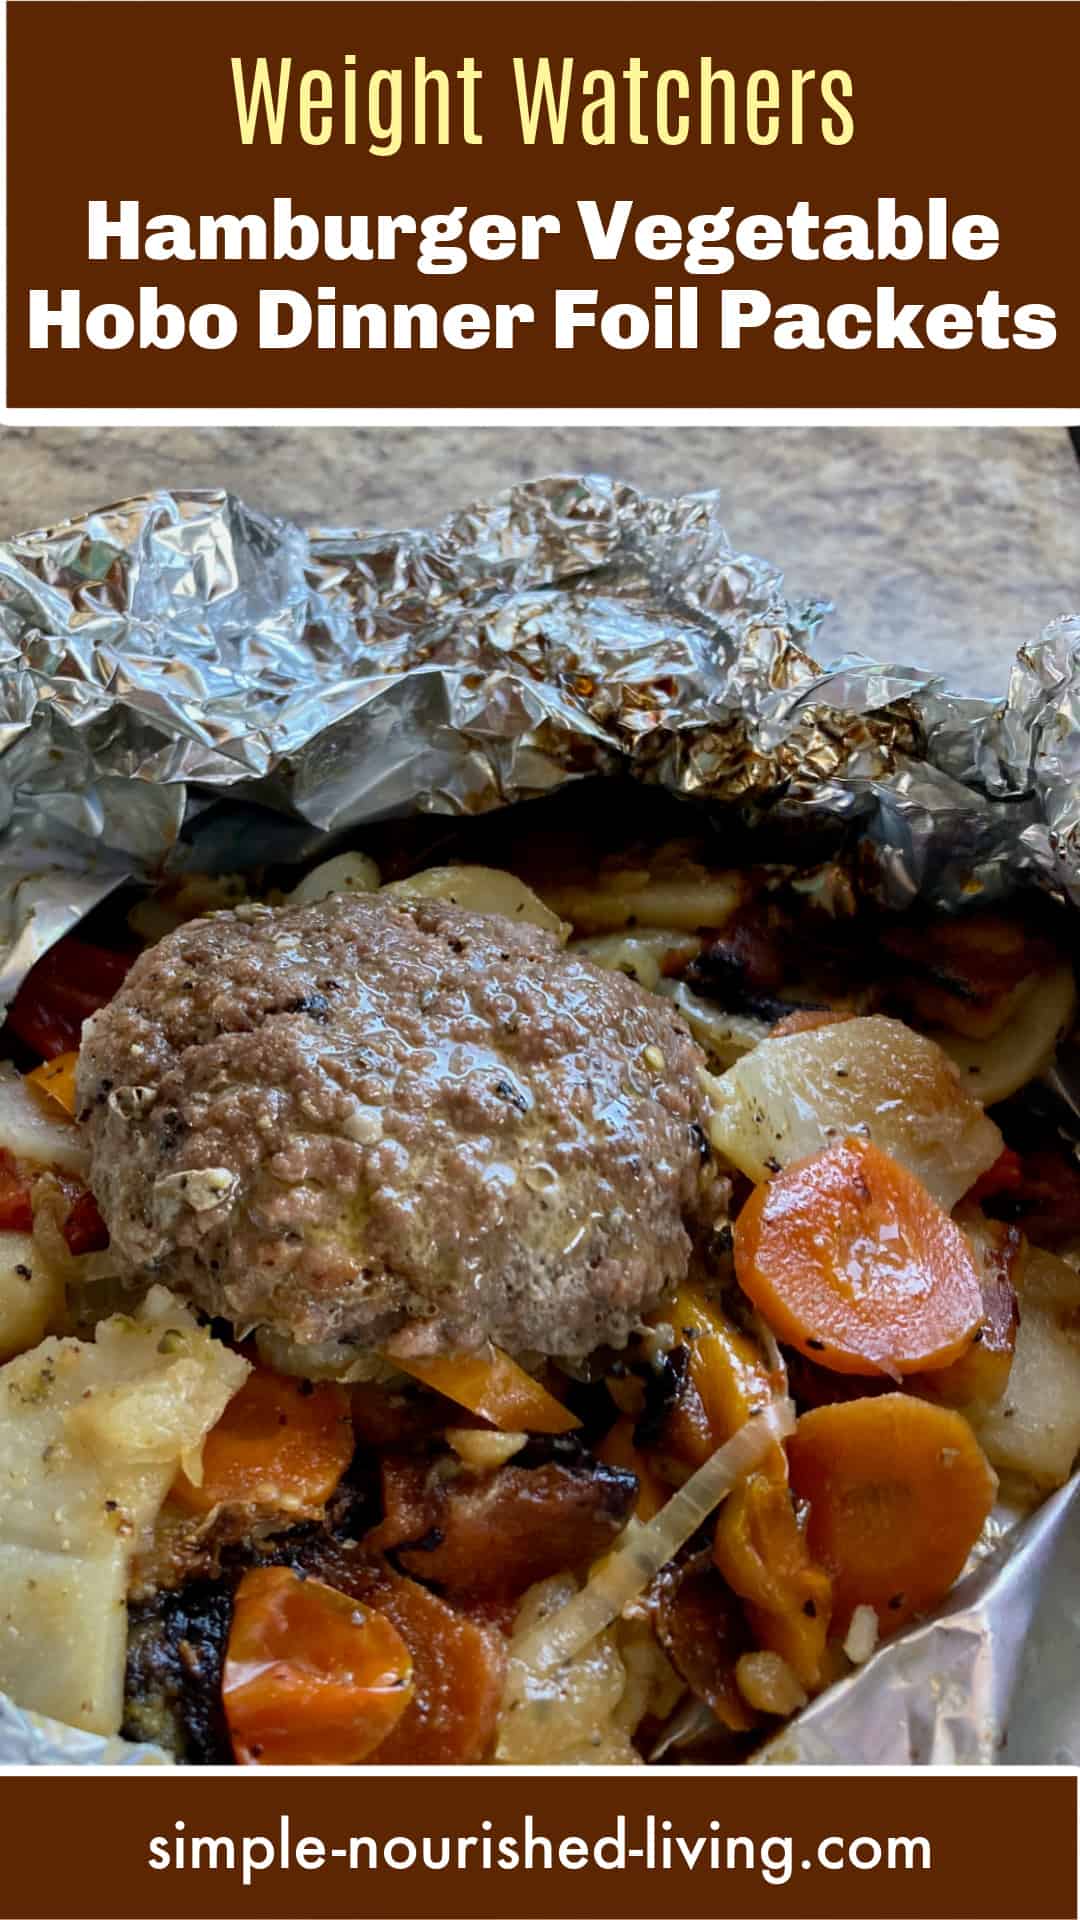 Hamburger and Vegetable Foil Packet with Brown Text Box: Weight Watchers Hamburger Vegetable Hobo Foil Pack Dinner